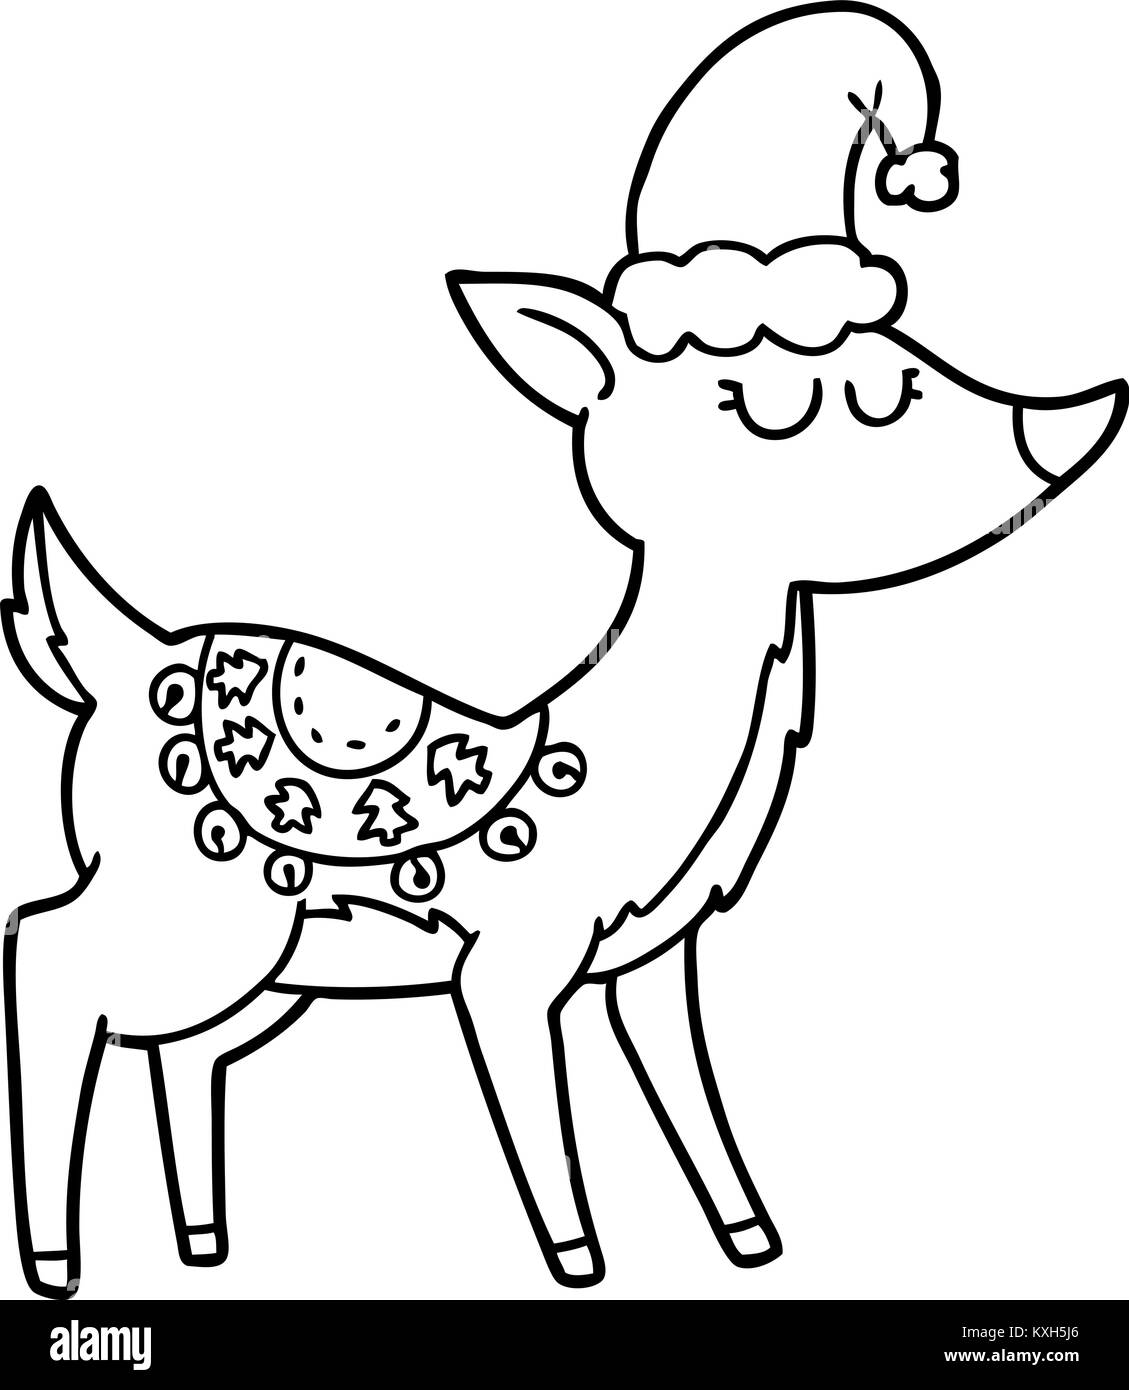 27 Collection How to draw a reindeer right side cartoon sketch standing for Learning